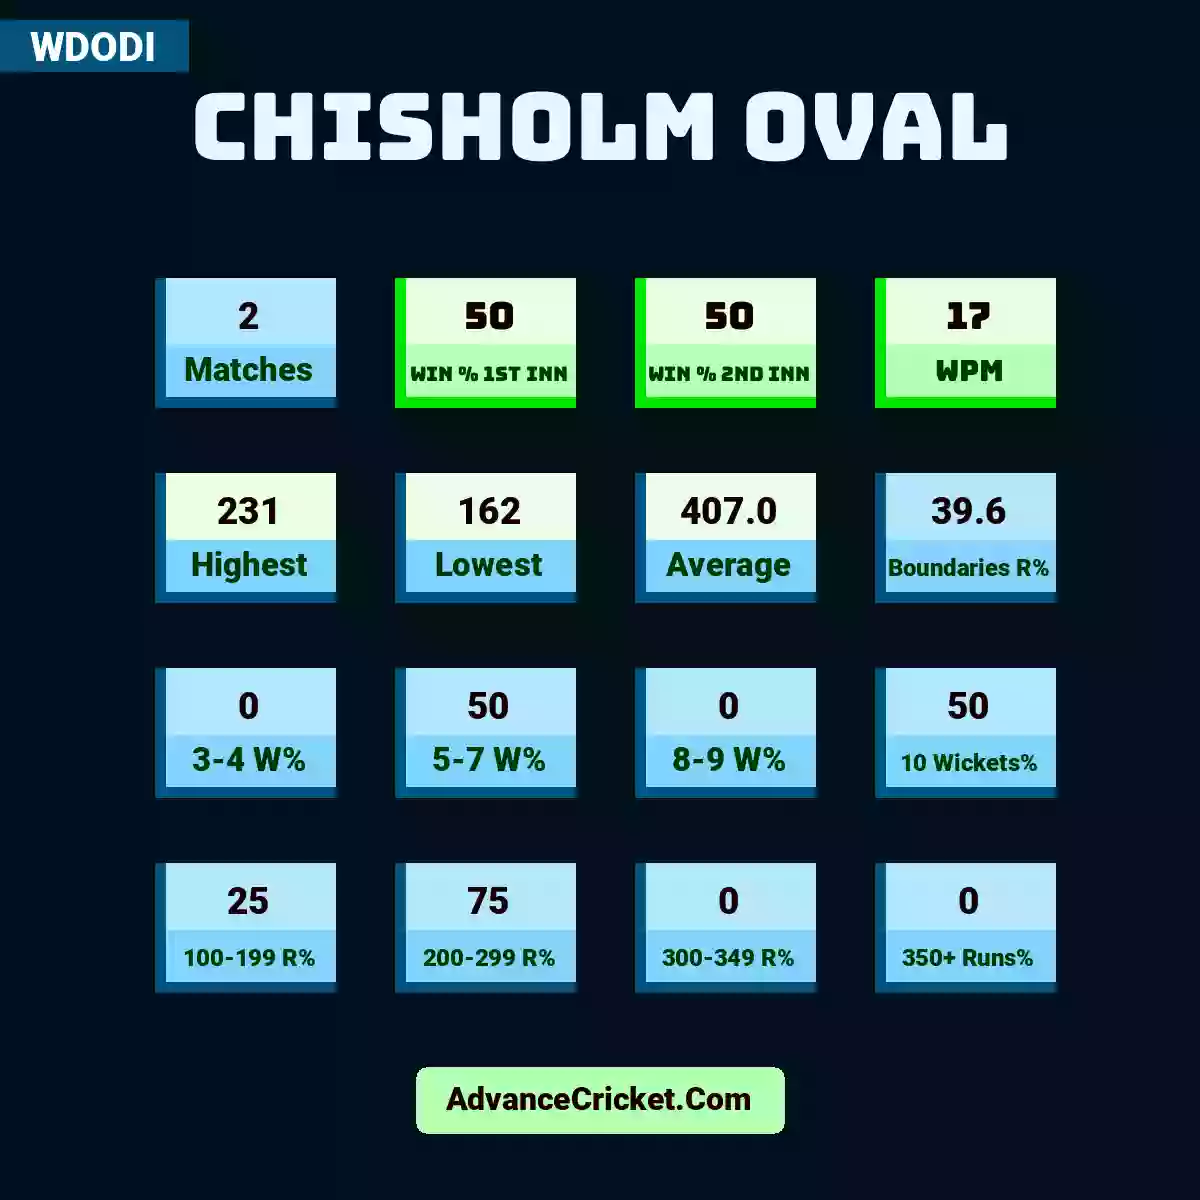 Image showing Chisholm Oval with Matches: 2, Win % 1st Inn: 50, Win % 2nd Inn: 50, WPM: 17, Highest: 231, Lowest: 162, Average: 407.0, Boundaries R%: 39.6, 3-4 W%: 0, 5-7 W%: 50, 8-9 W%: 0, 10 Wickets%: 50, 100-199 R%: 25, 200-299 R%: 75, 300-349 R%: 0, 350+ Runs%: 0.